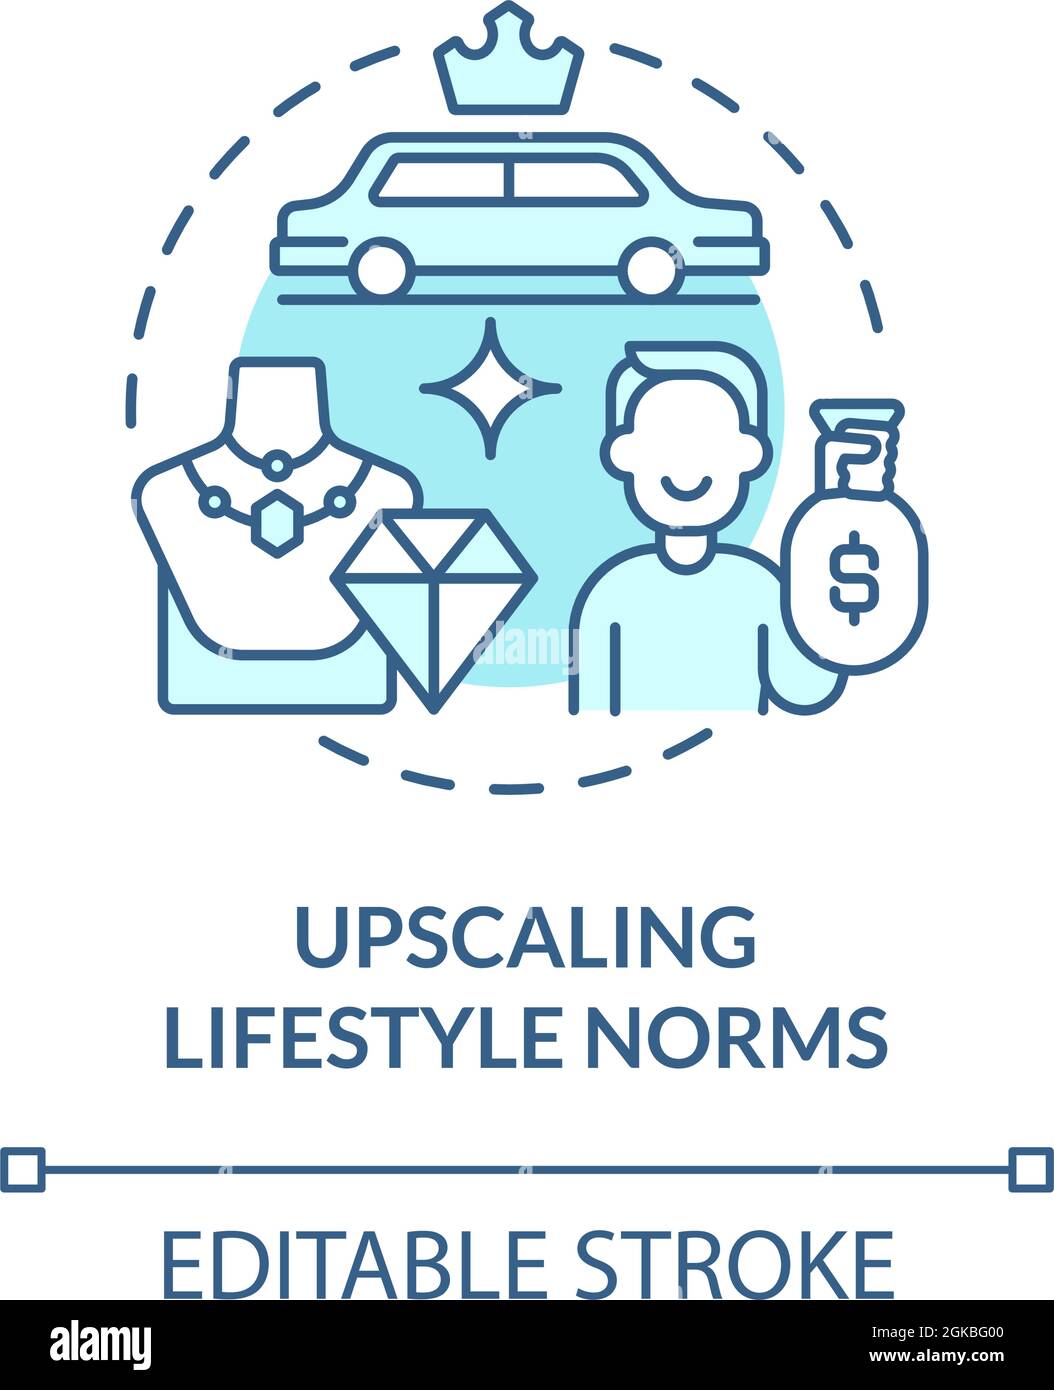 Upscaling lifestyle norms blue concept icon Stock Vector